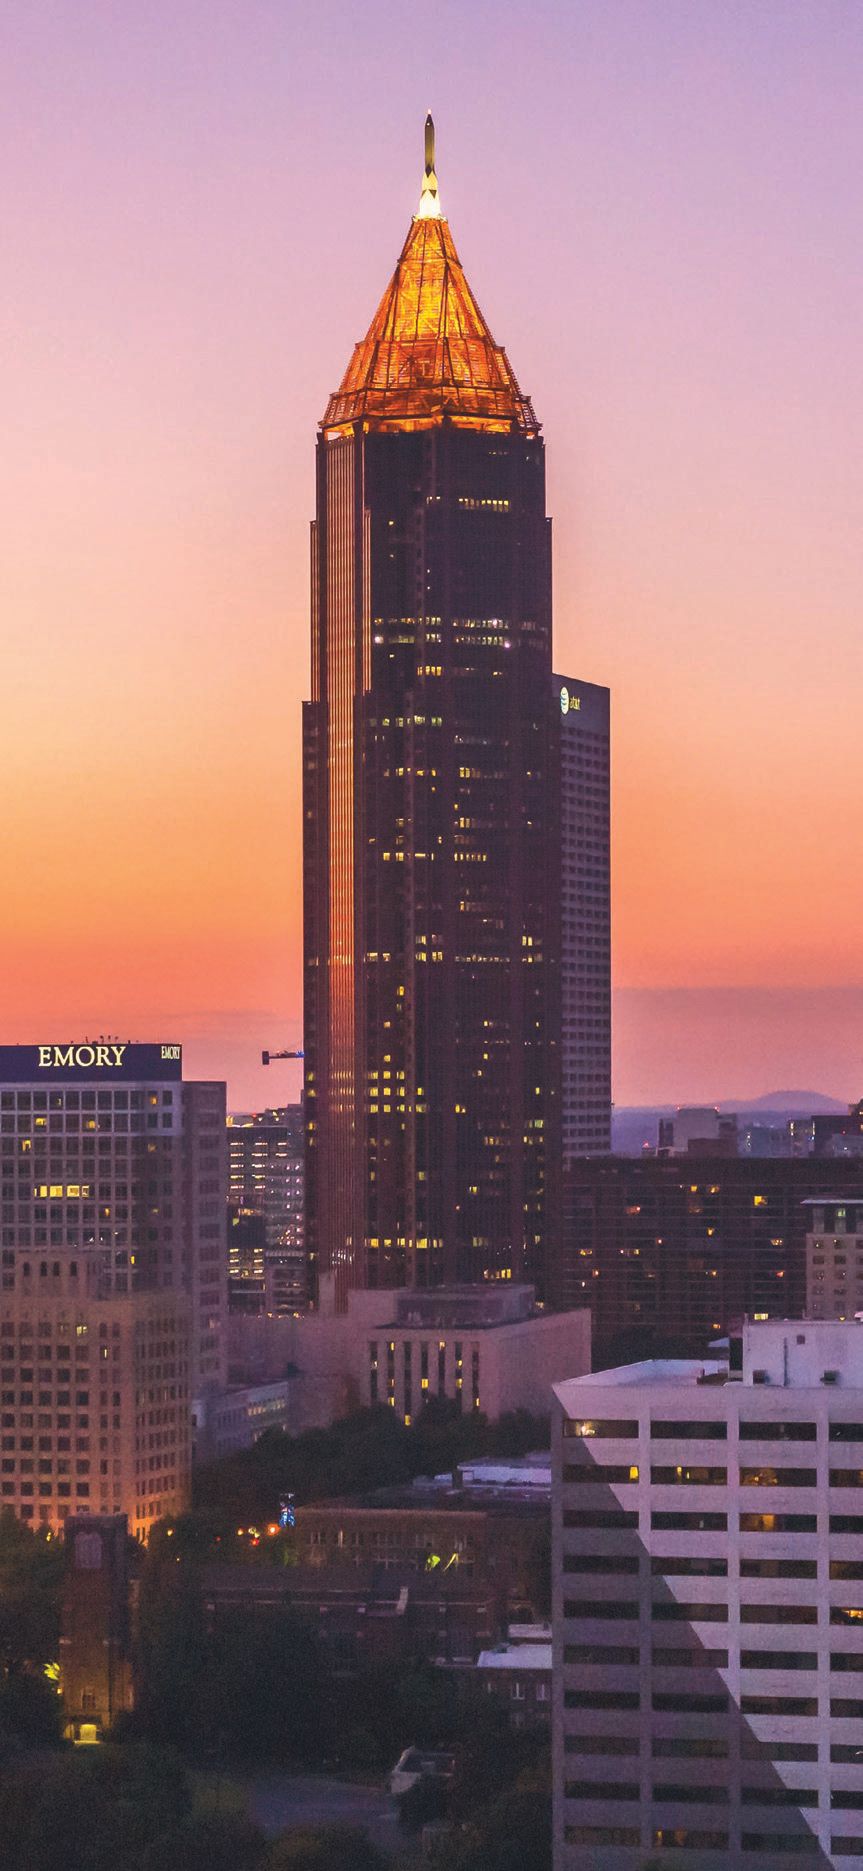 The tallest building in Atlanta’s skyline, the Bank of America Plaza is 55 stories. PHOTO BY: BRAD HUCHTEMAN/UNSPLASH